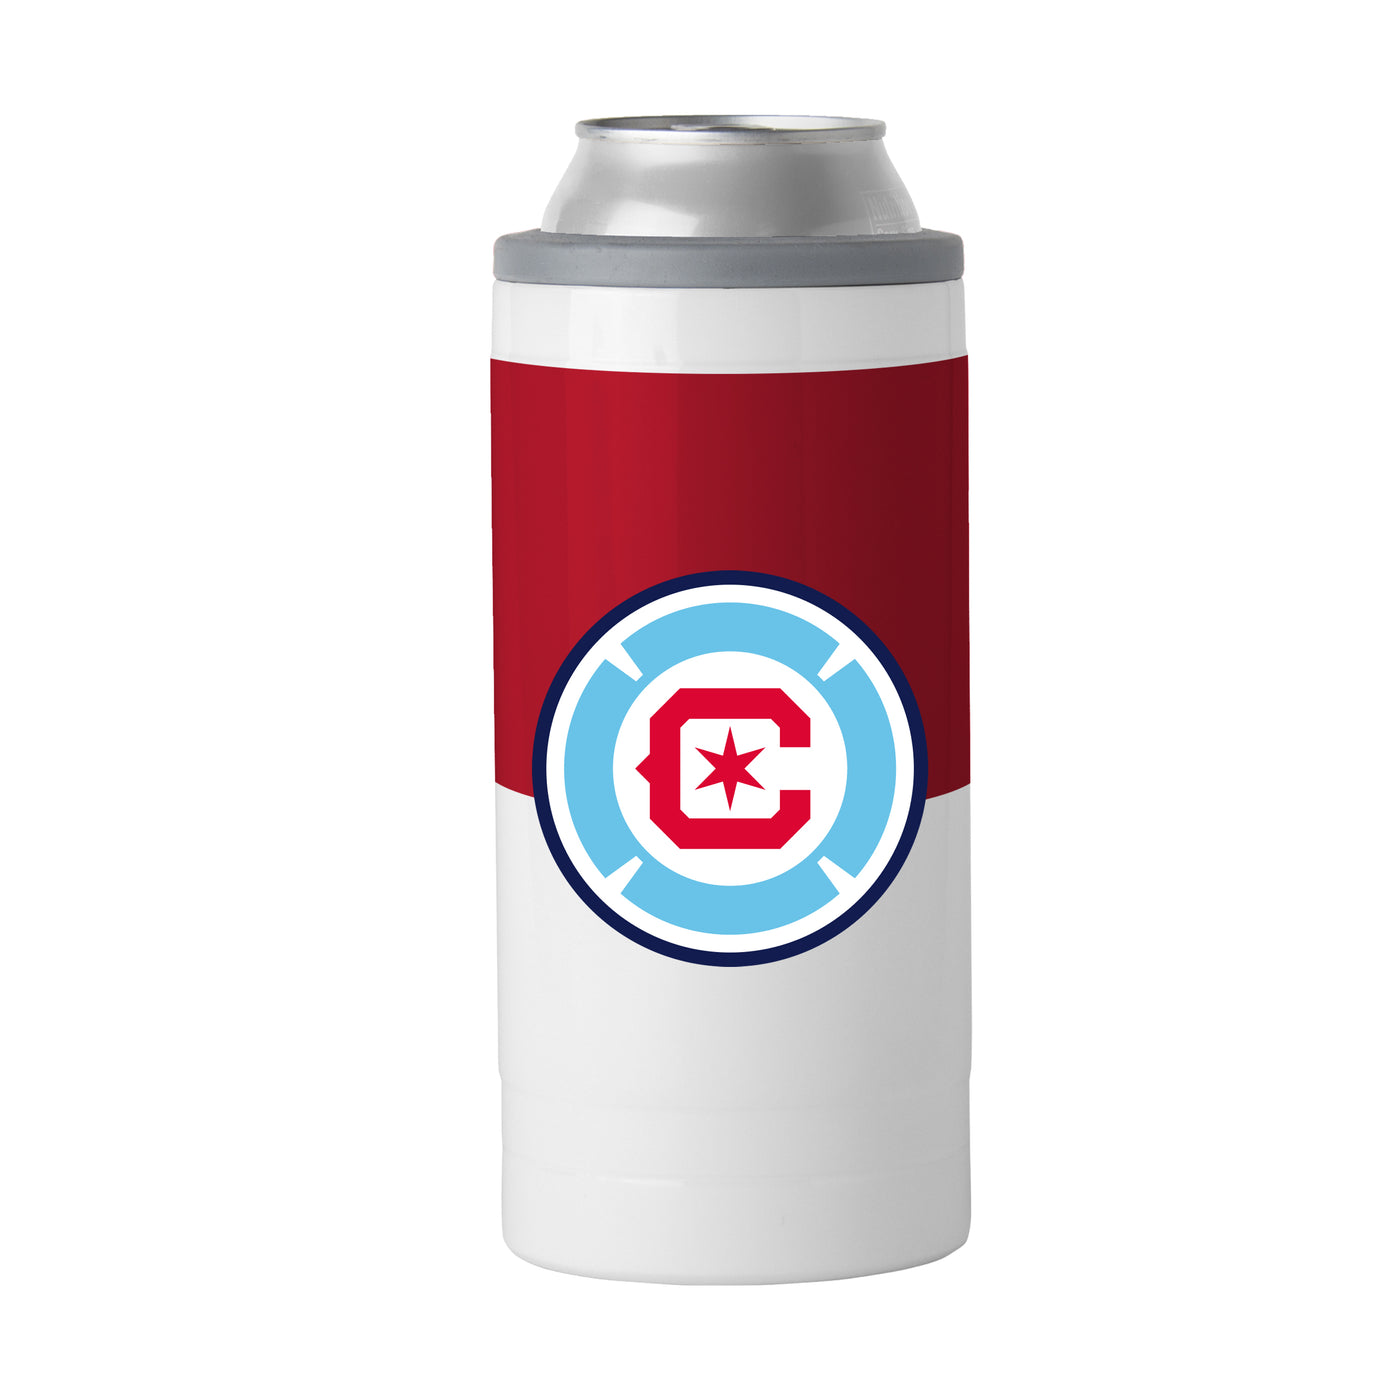 Chicago Fire 12oz Colorblock Slim Can Coolie